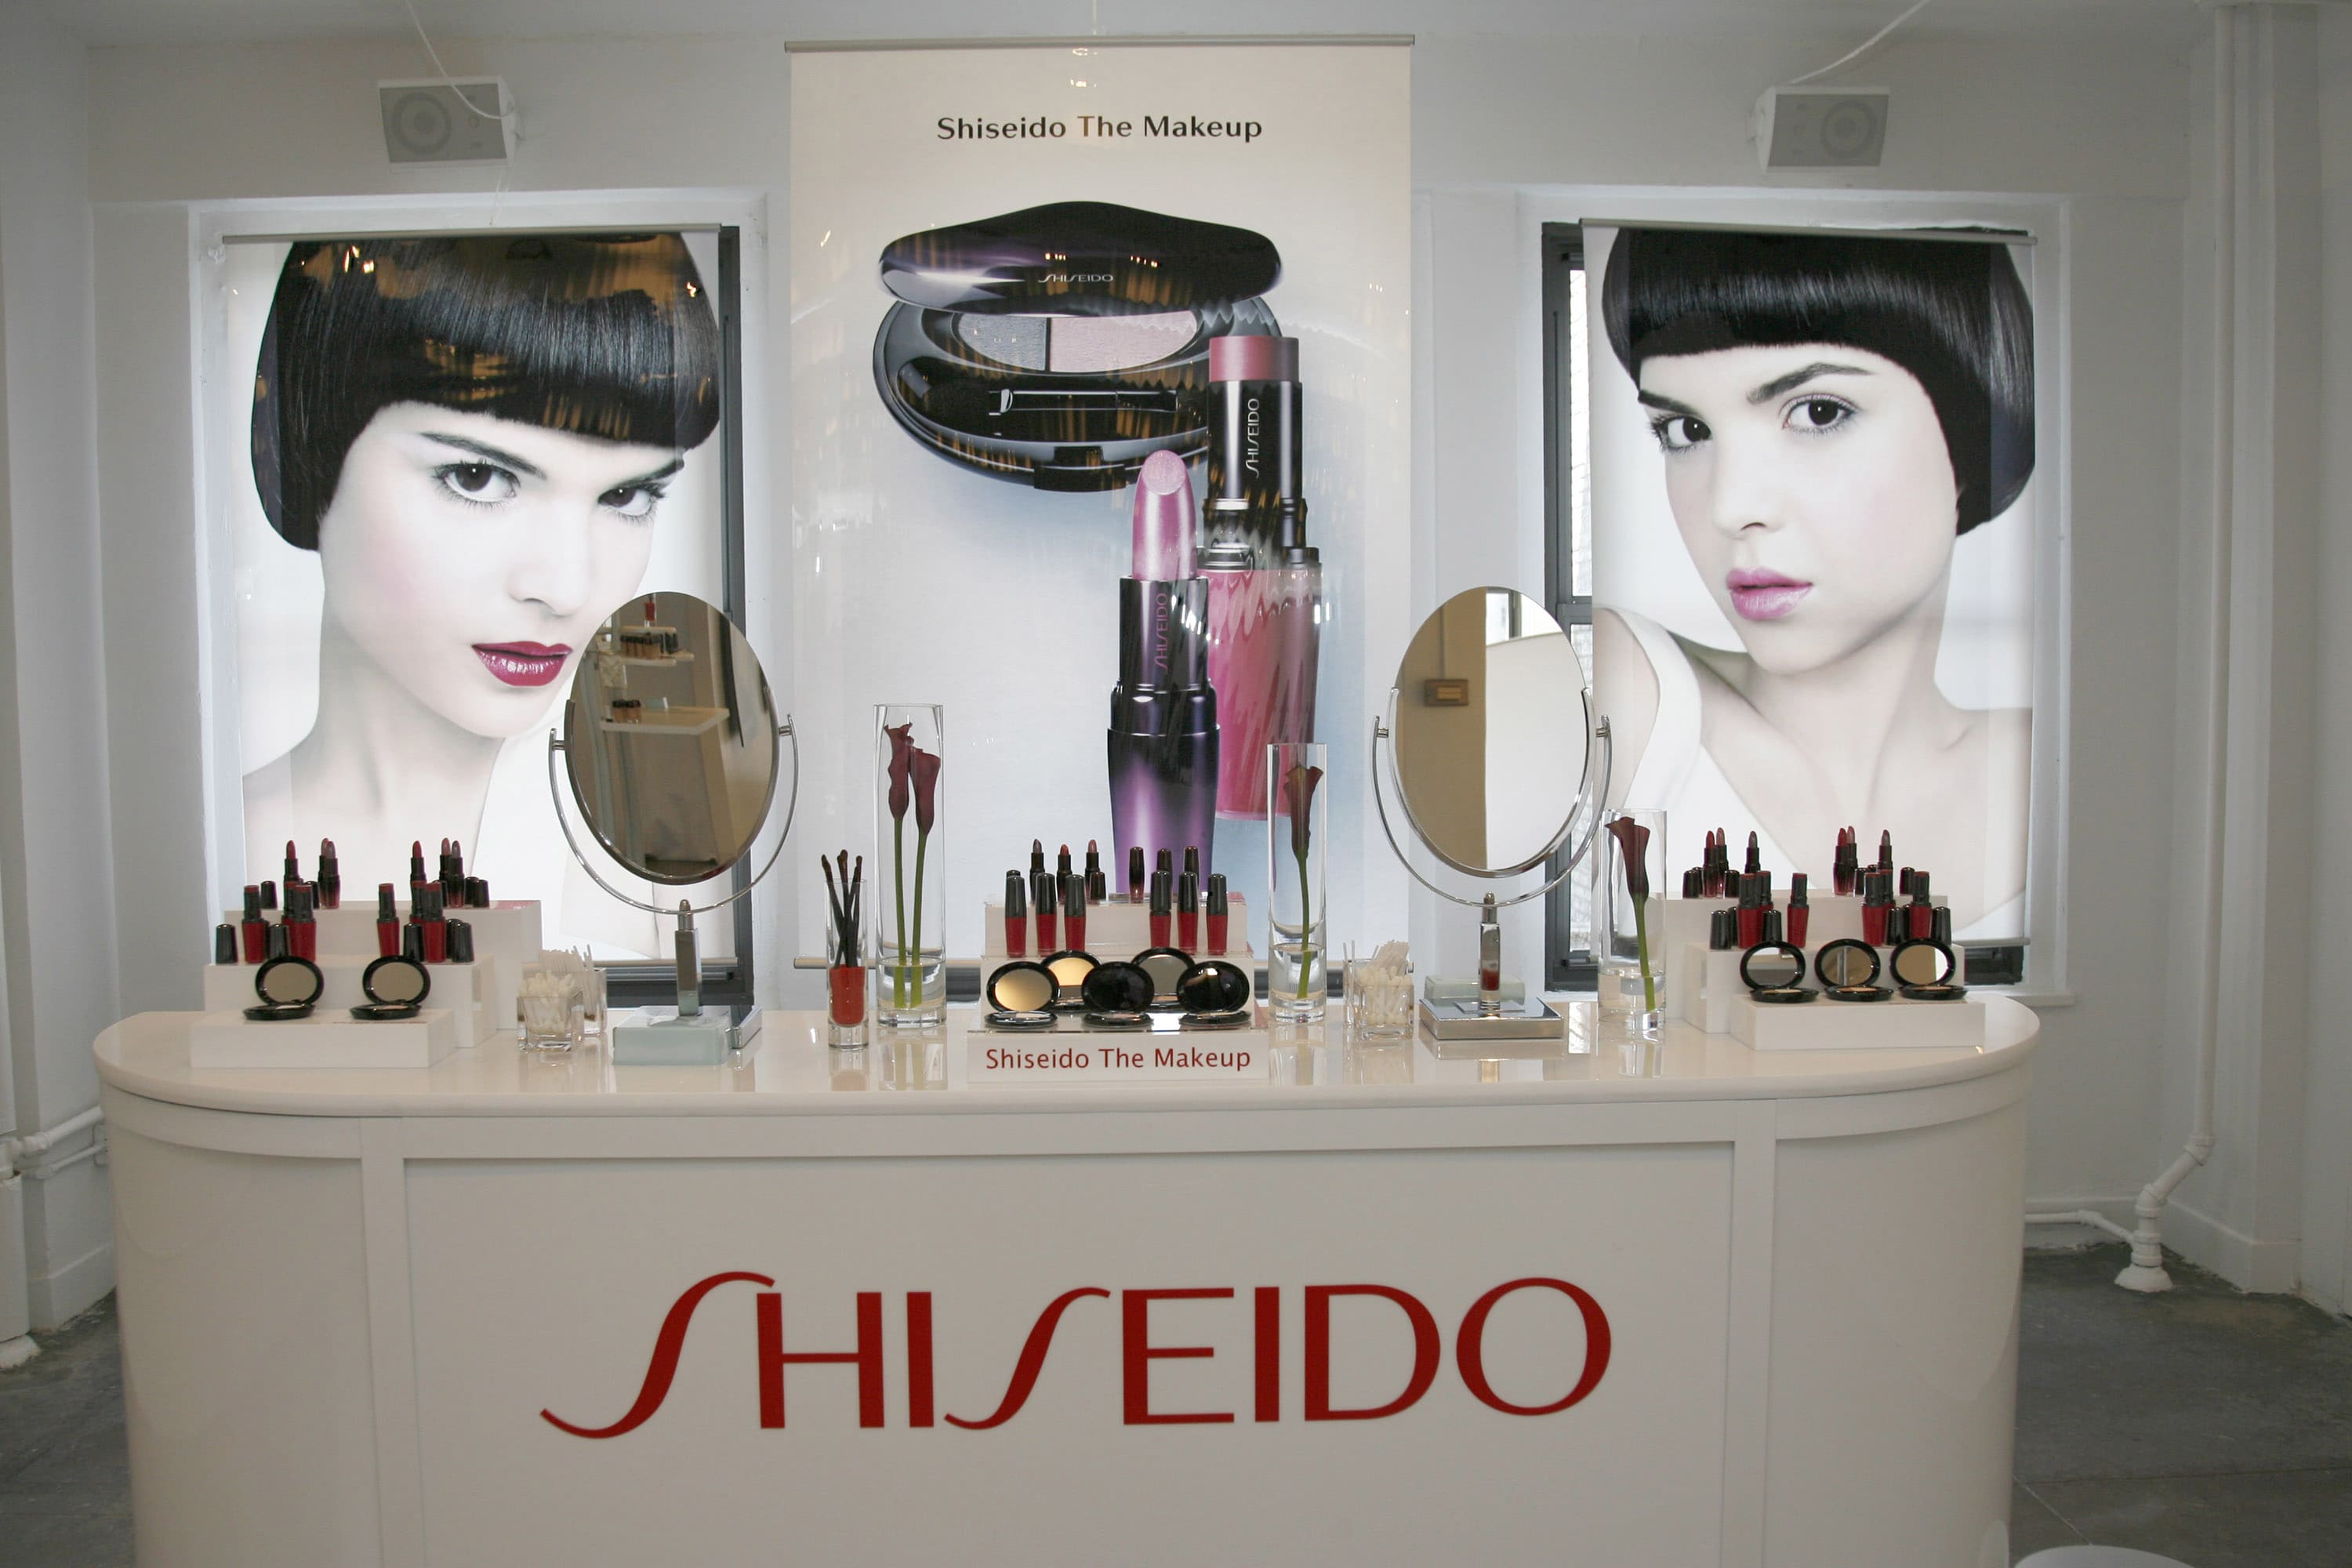 Shiseido will sell the personal care business to CVC in a $ 1.5 billion transaction